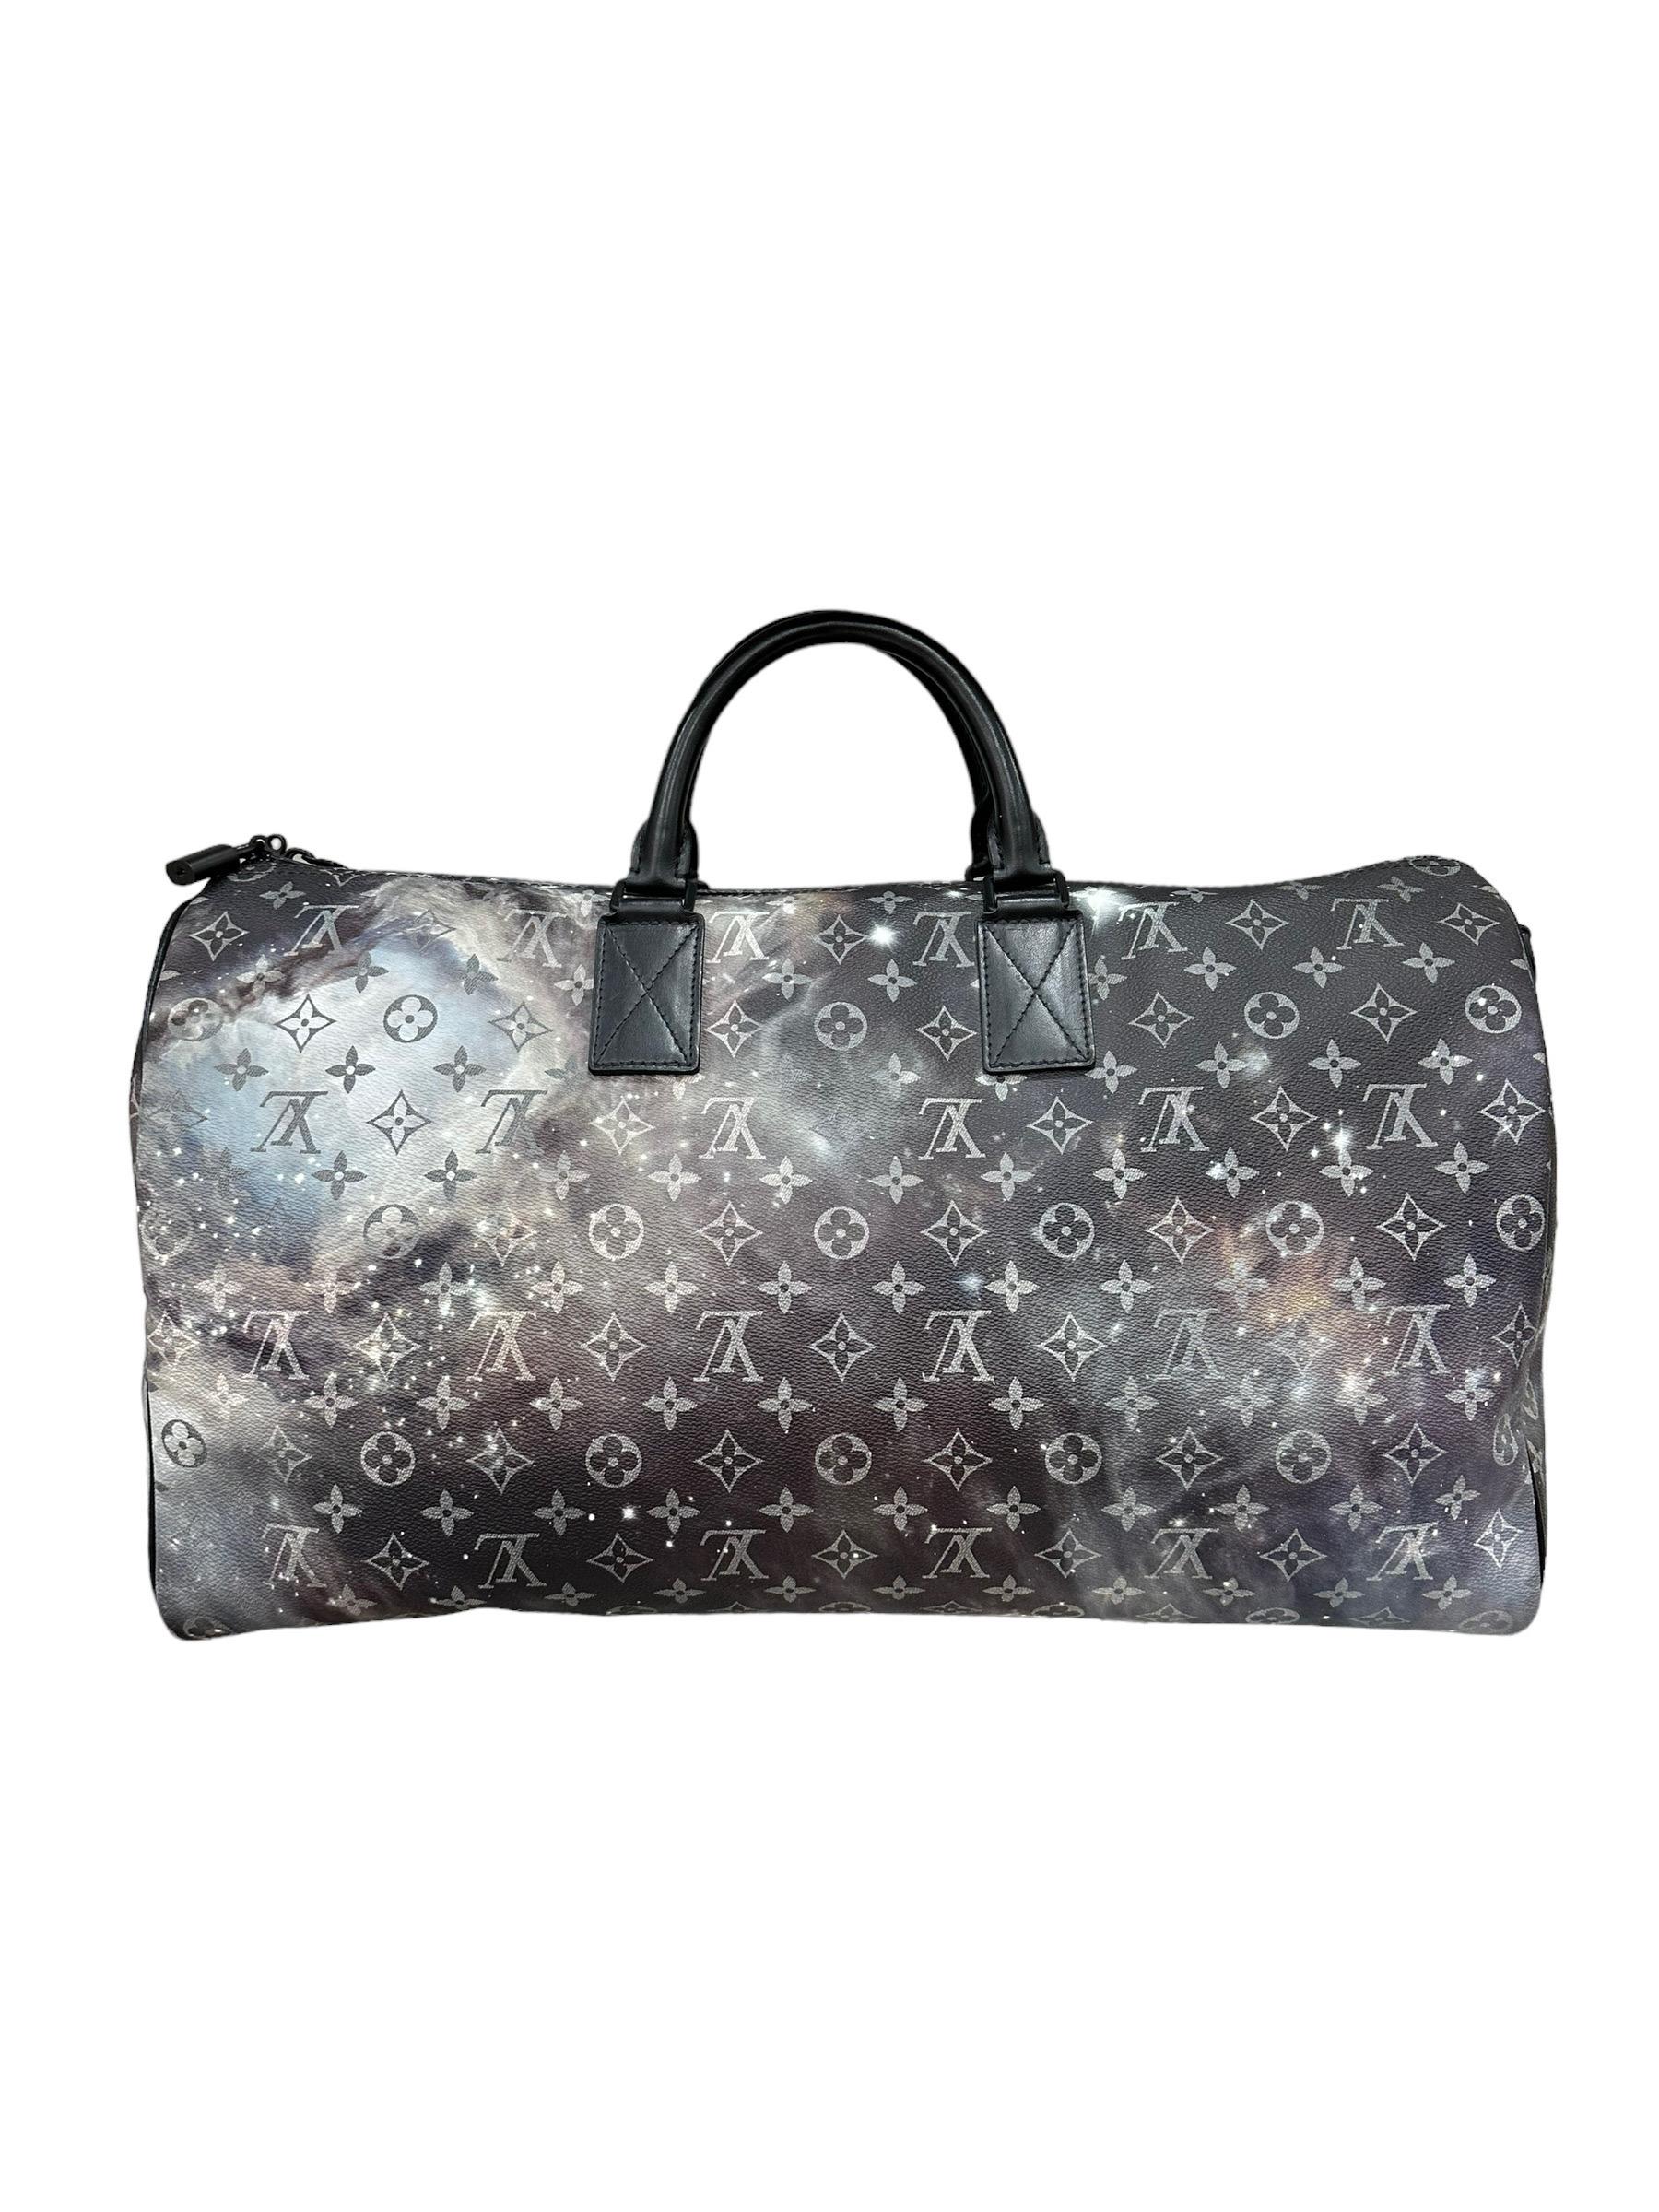 Louis Vuitton Galaxy Keepall Bandouliere 50 Limited Edition Travel Bag For Sale 5